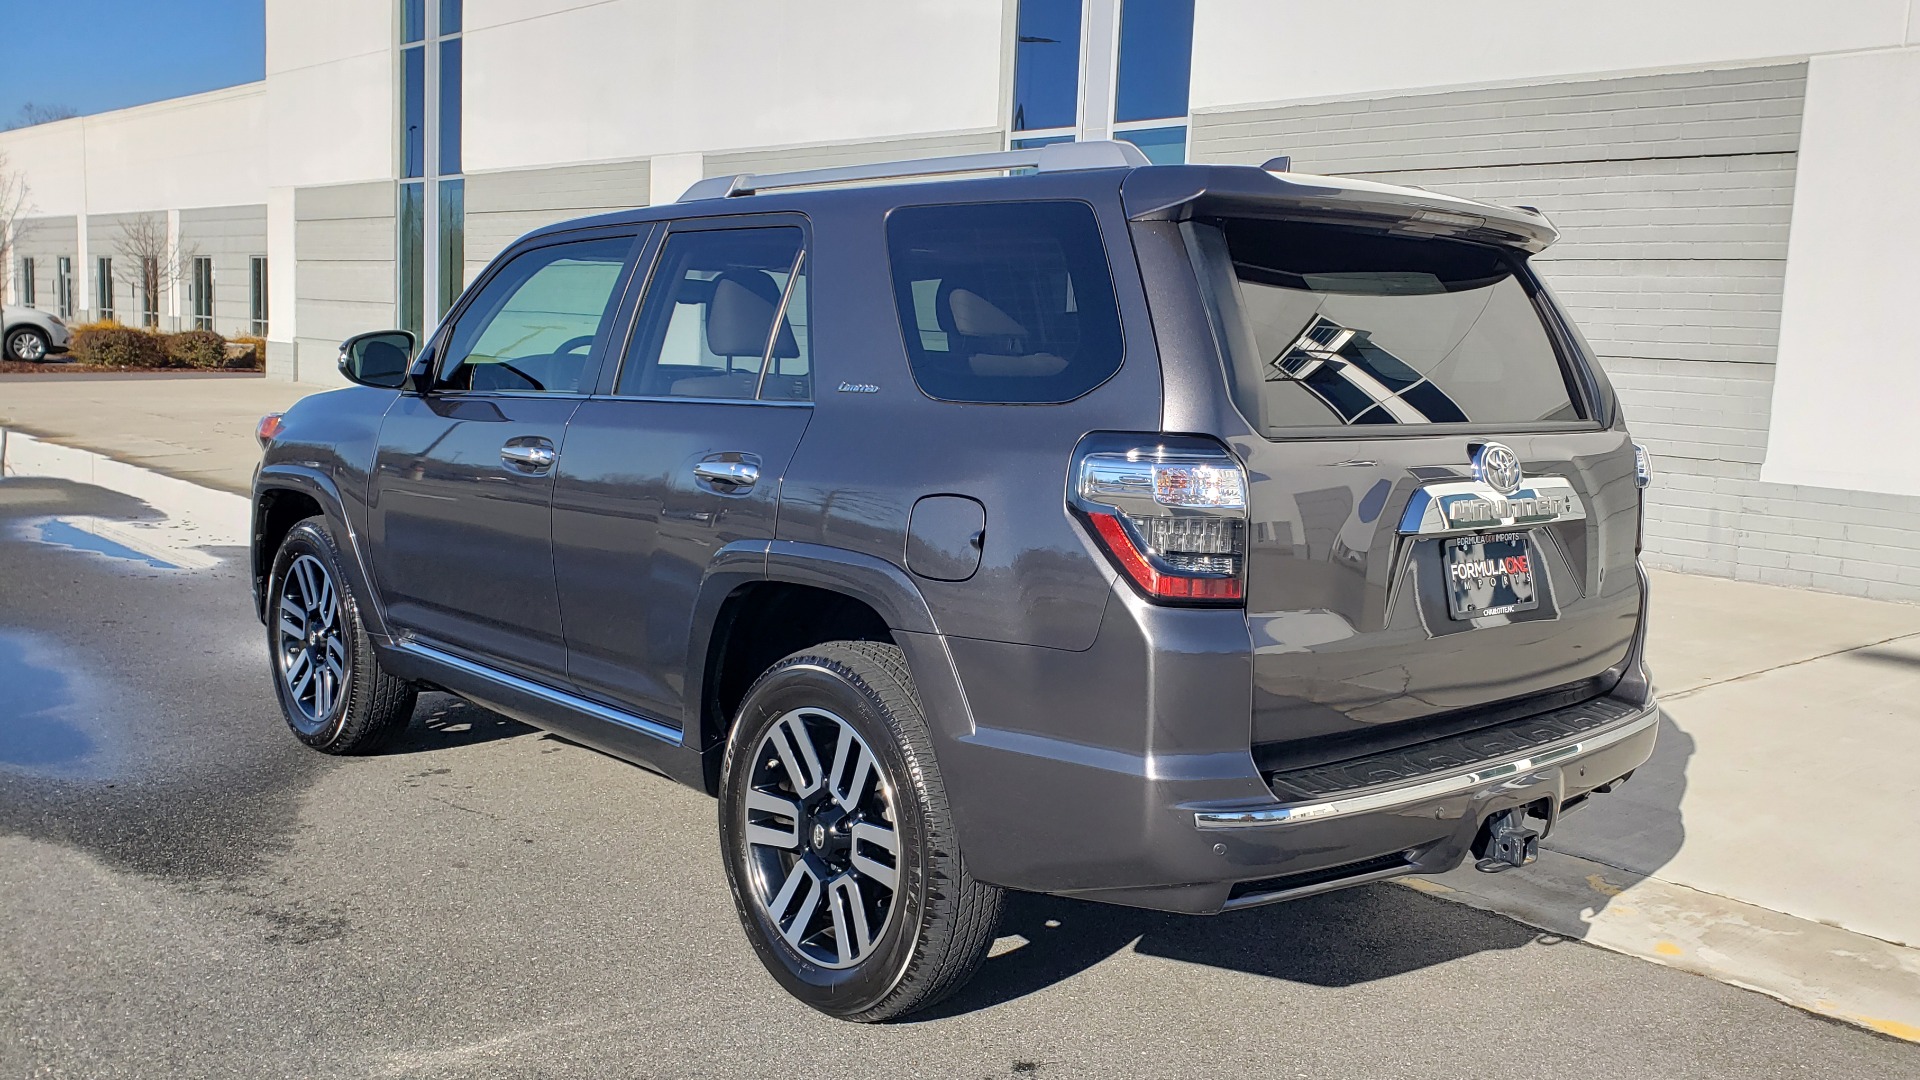 Used 2018 Toyota 4RUNNER LIMITED 4X4 / 4.0 V6 / AUTO / NAV / SUNROOF / REARVIEW for sale Sold at Formula Imports in Charlotte NC 28227 4